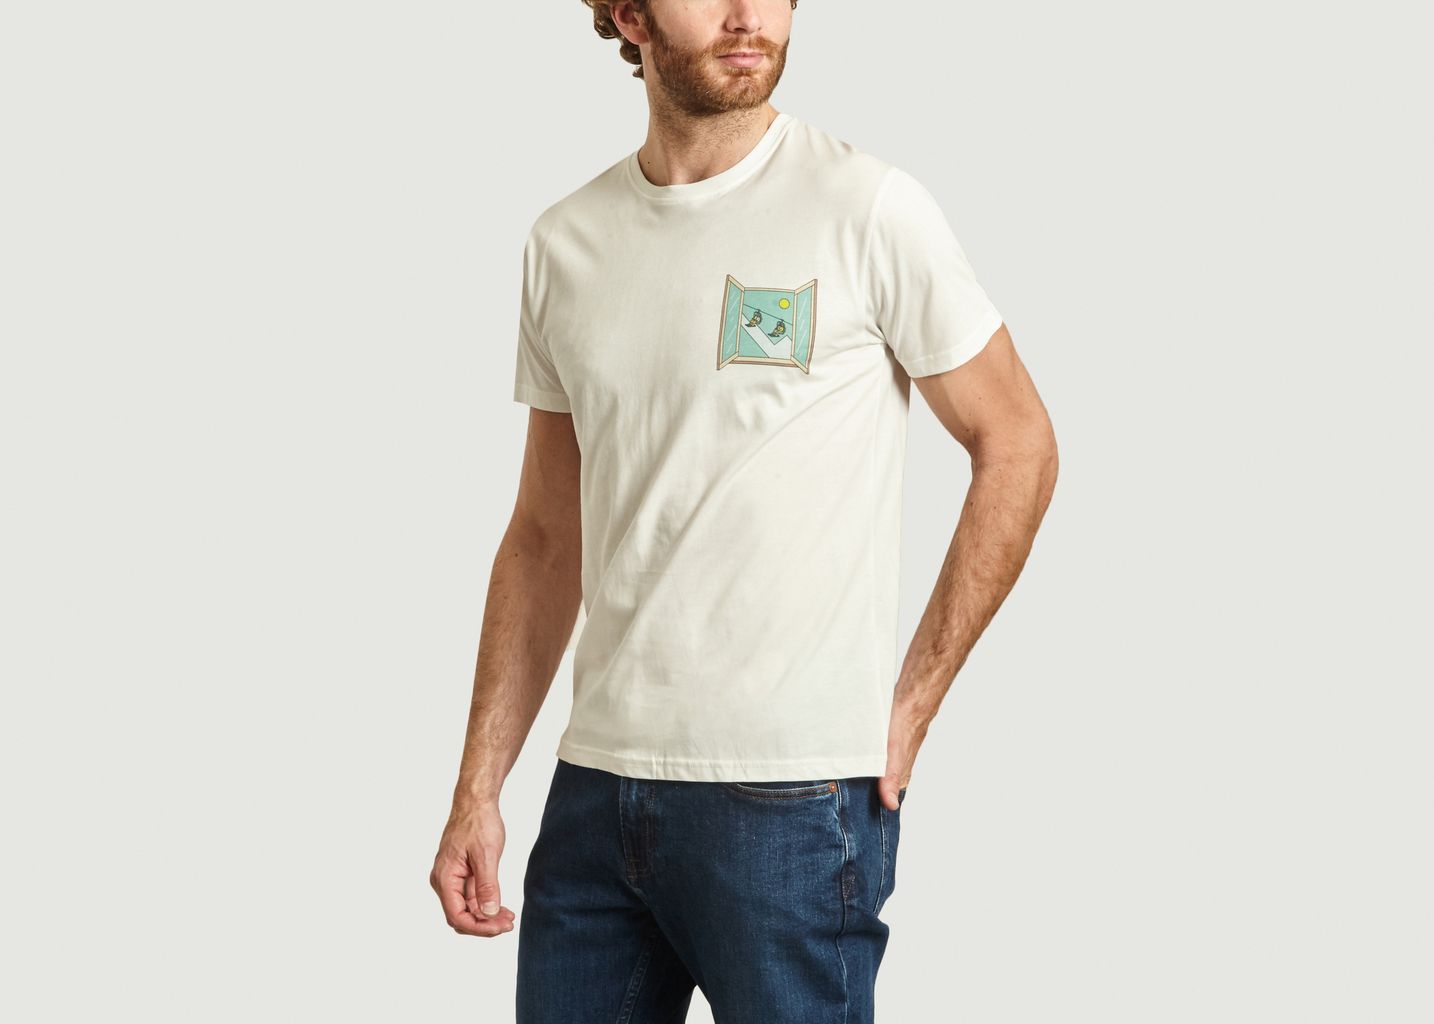 T-shirt Chairlift - Olow